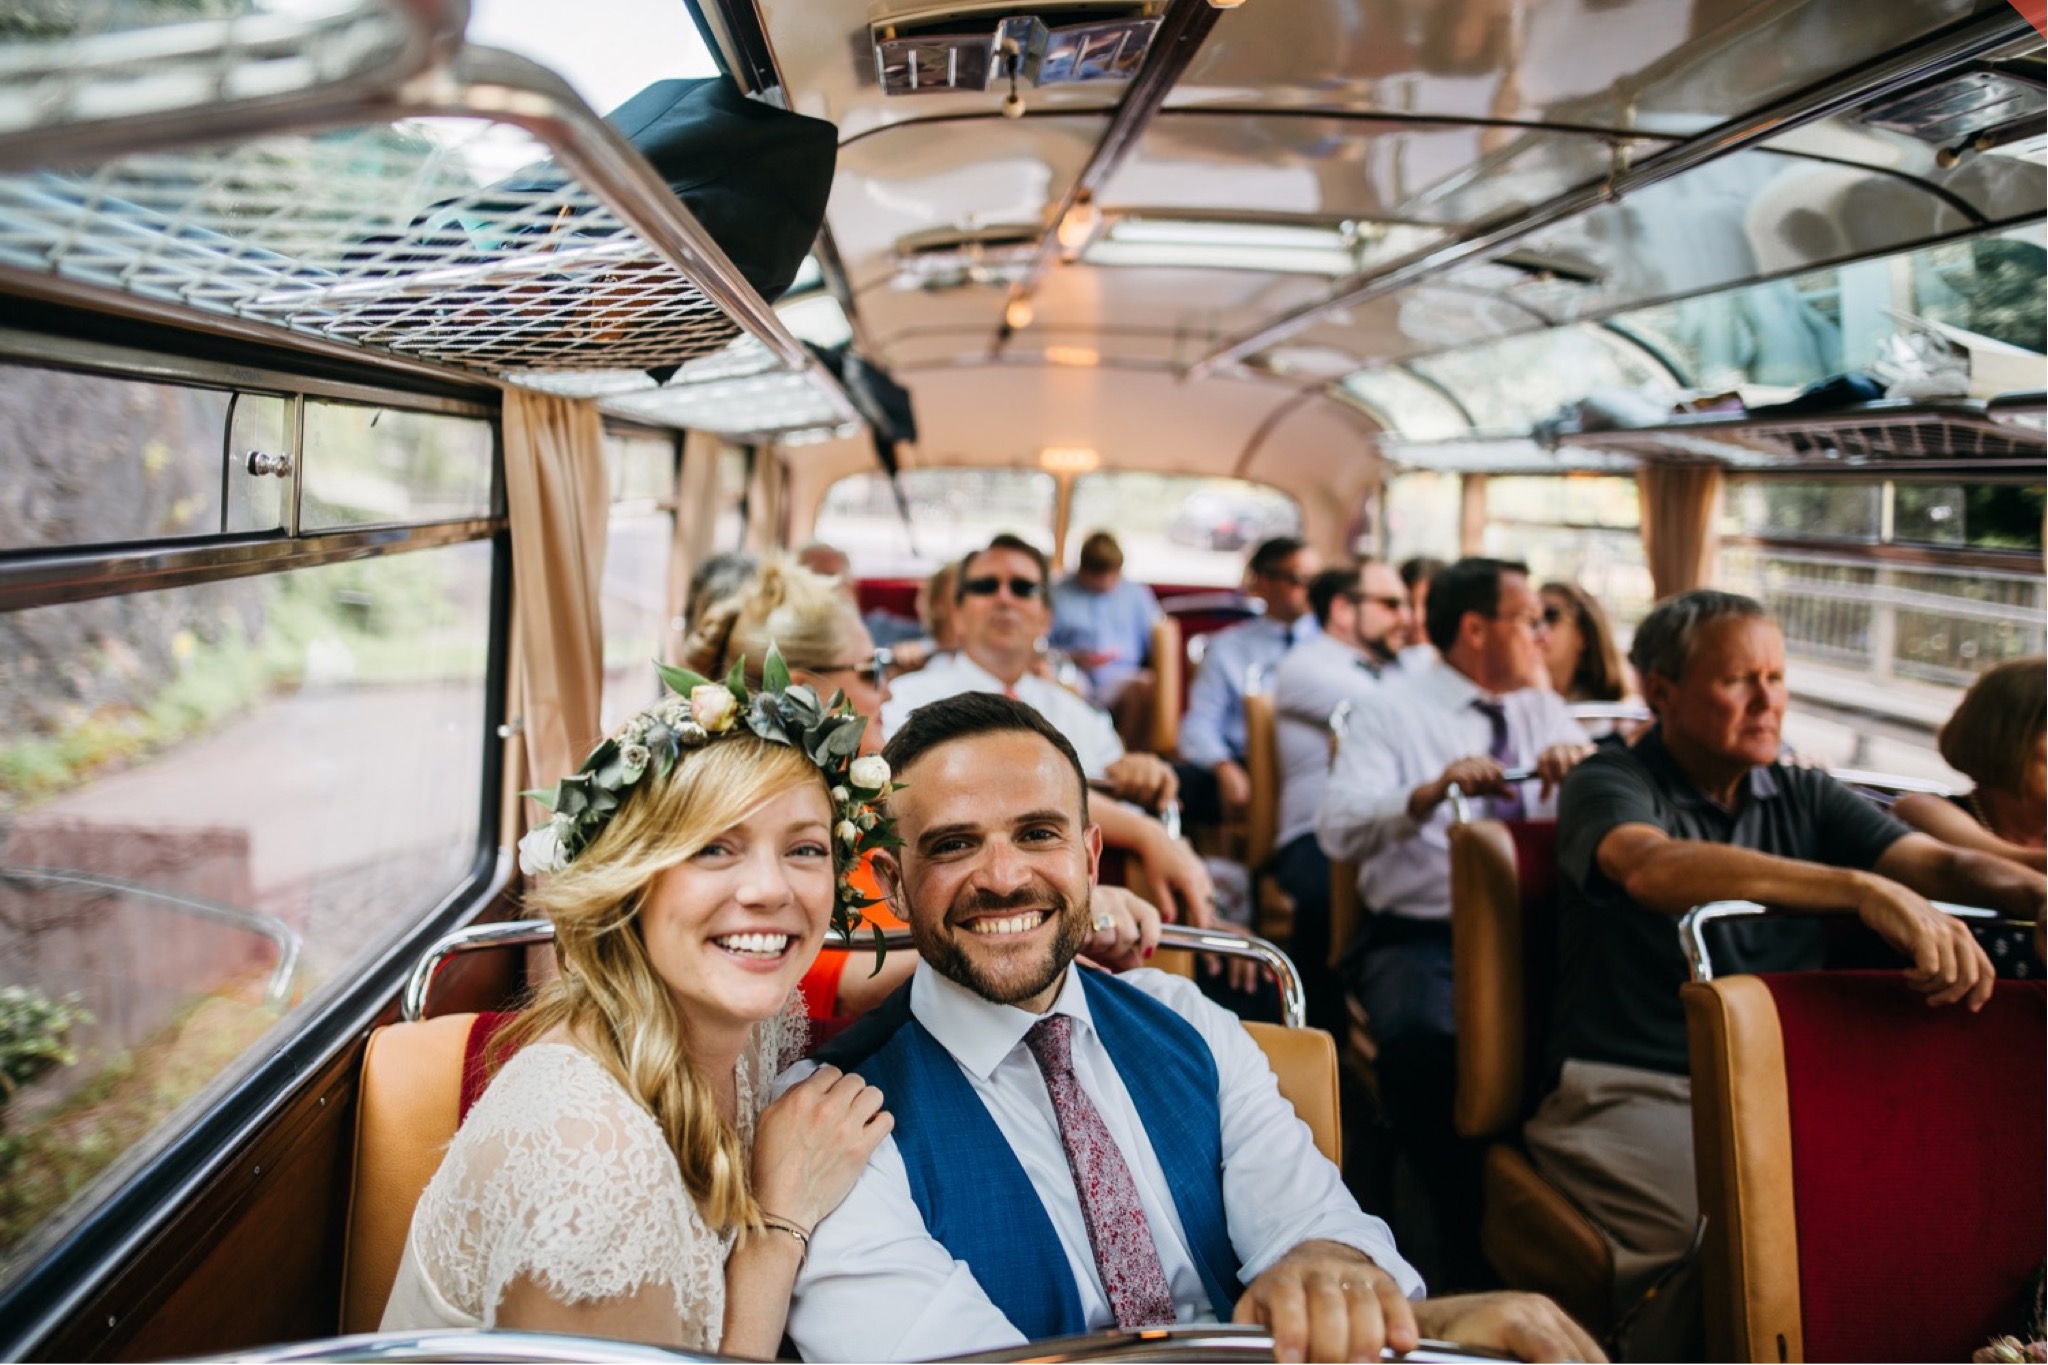 Bride and groom sit together with their guests on a vintage bus.